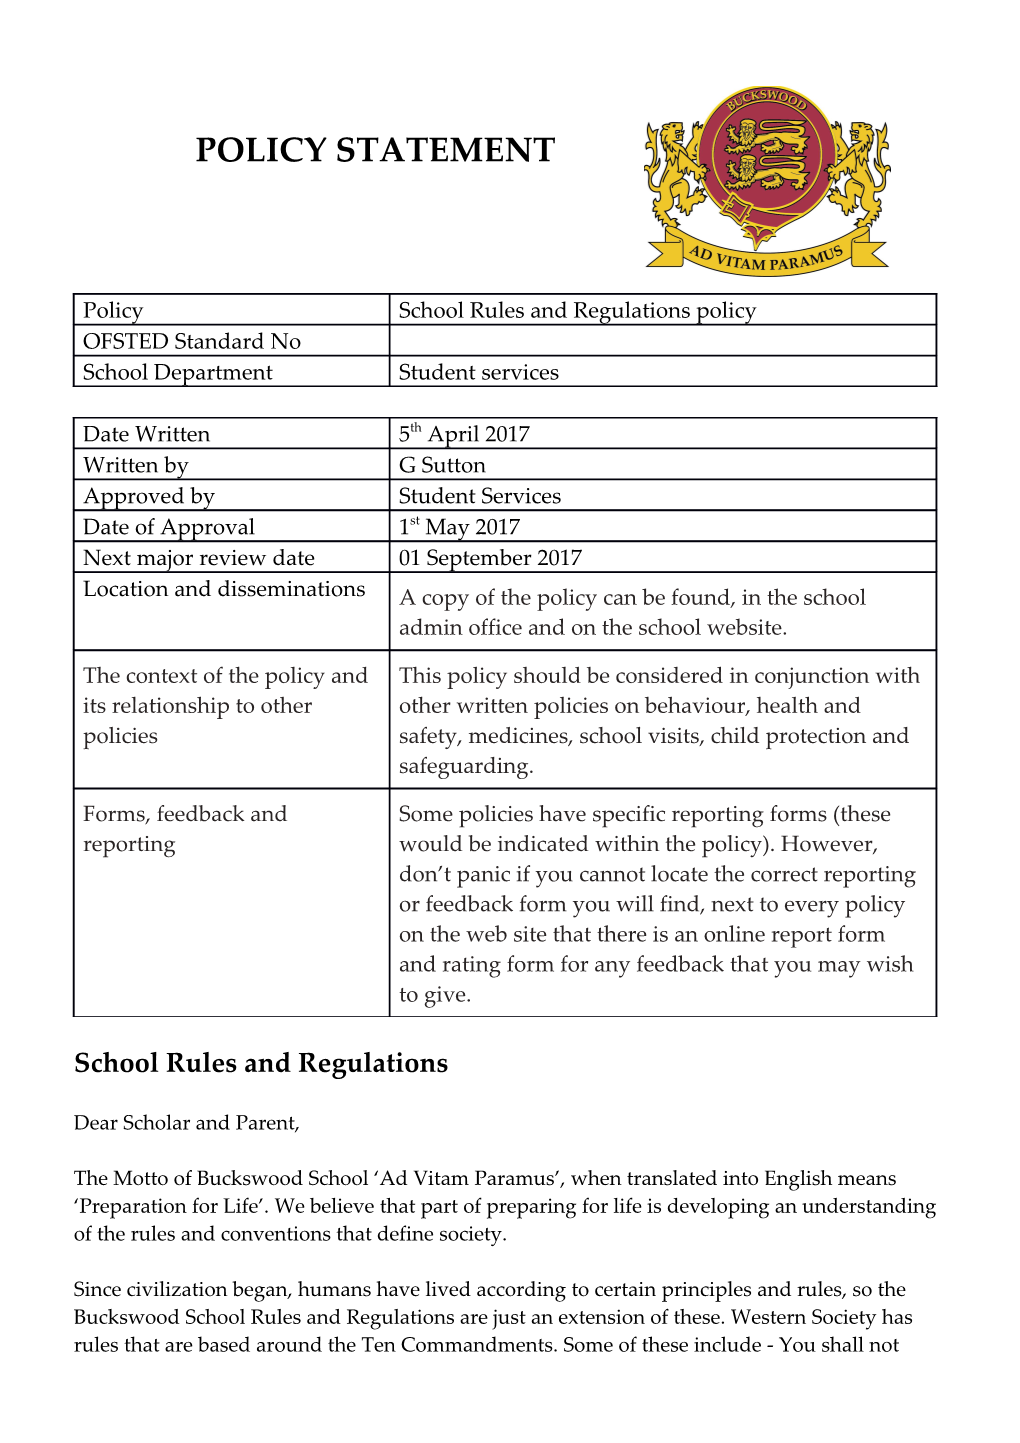 School Rules and Regulations